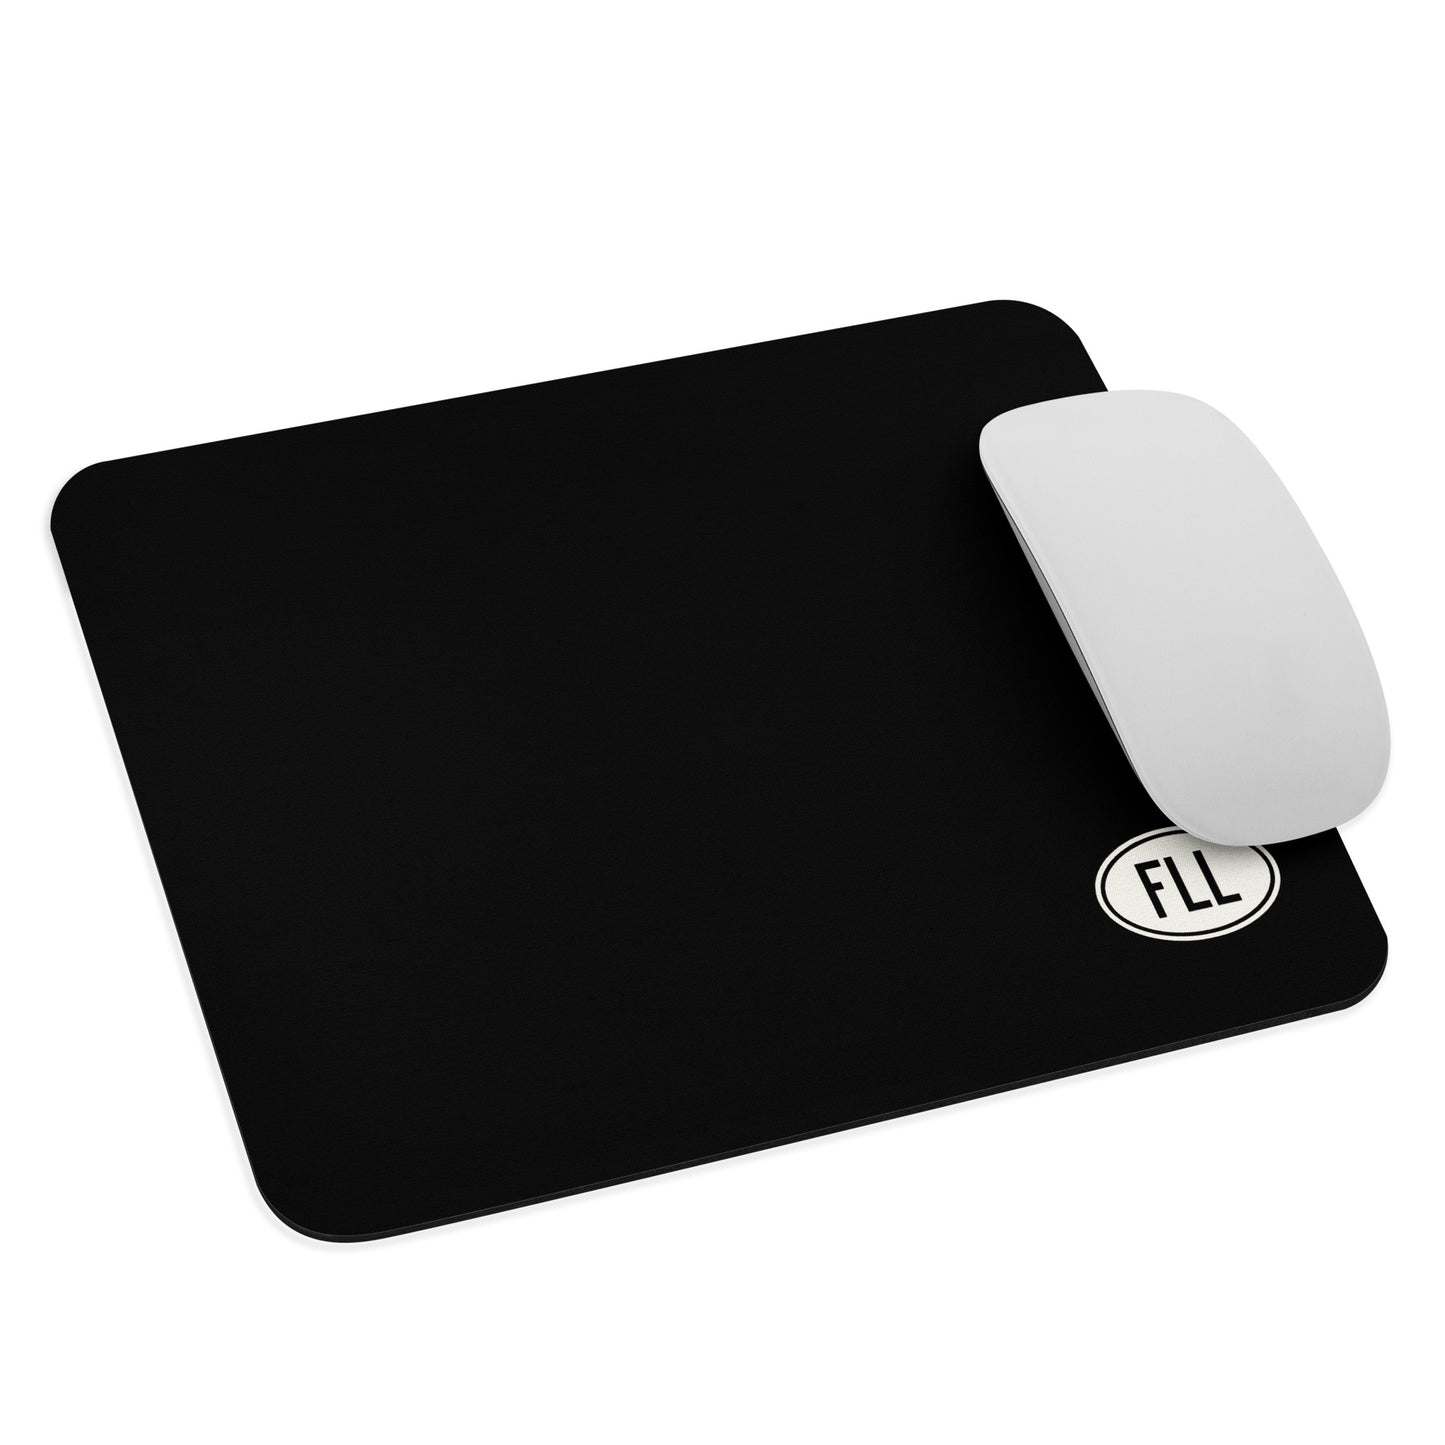 Unique Travel Gift Mouse Pad - White Oval • FLL Fort Lauderdale • YHM Designs - Image 03